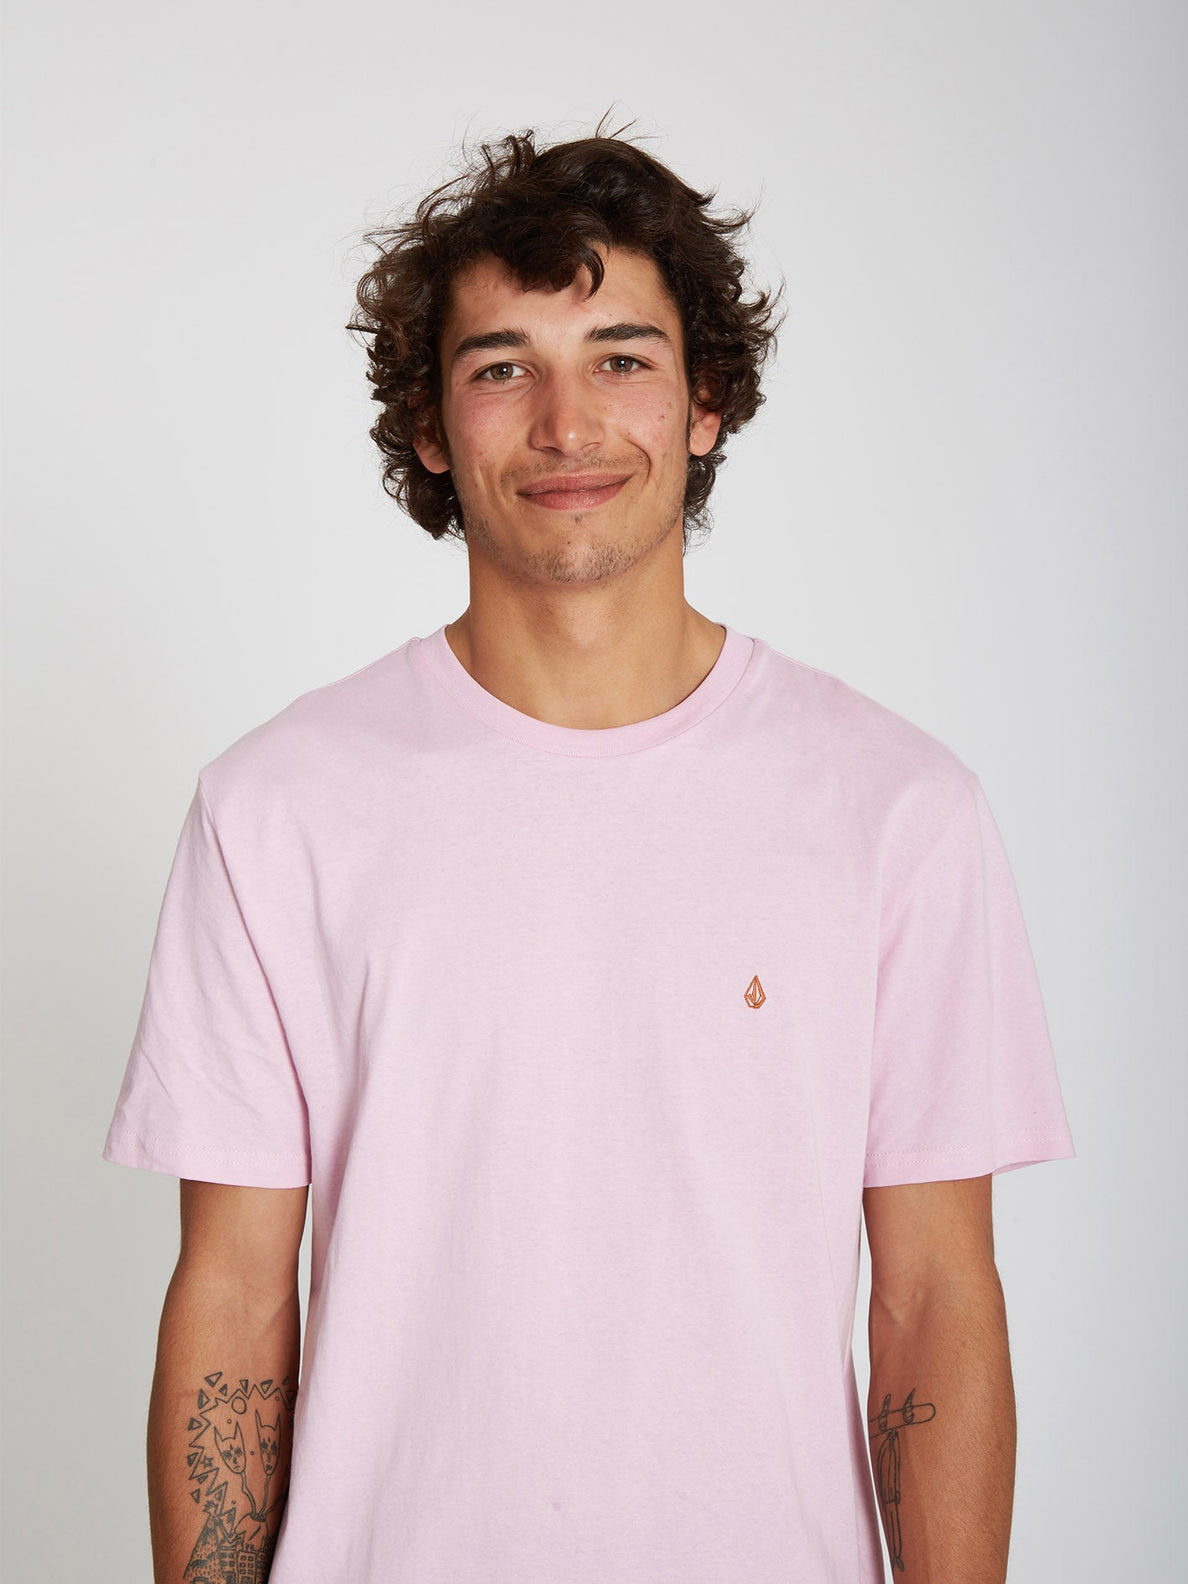 Stone Blanks T-shirt - PARADISE PINK (A3512056_PDP) [12]